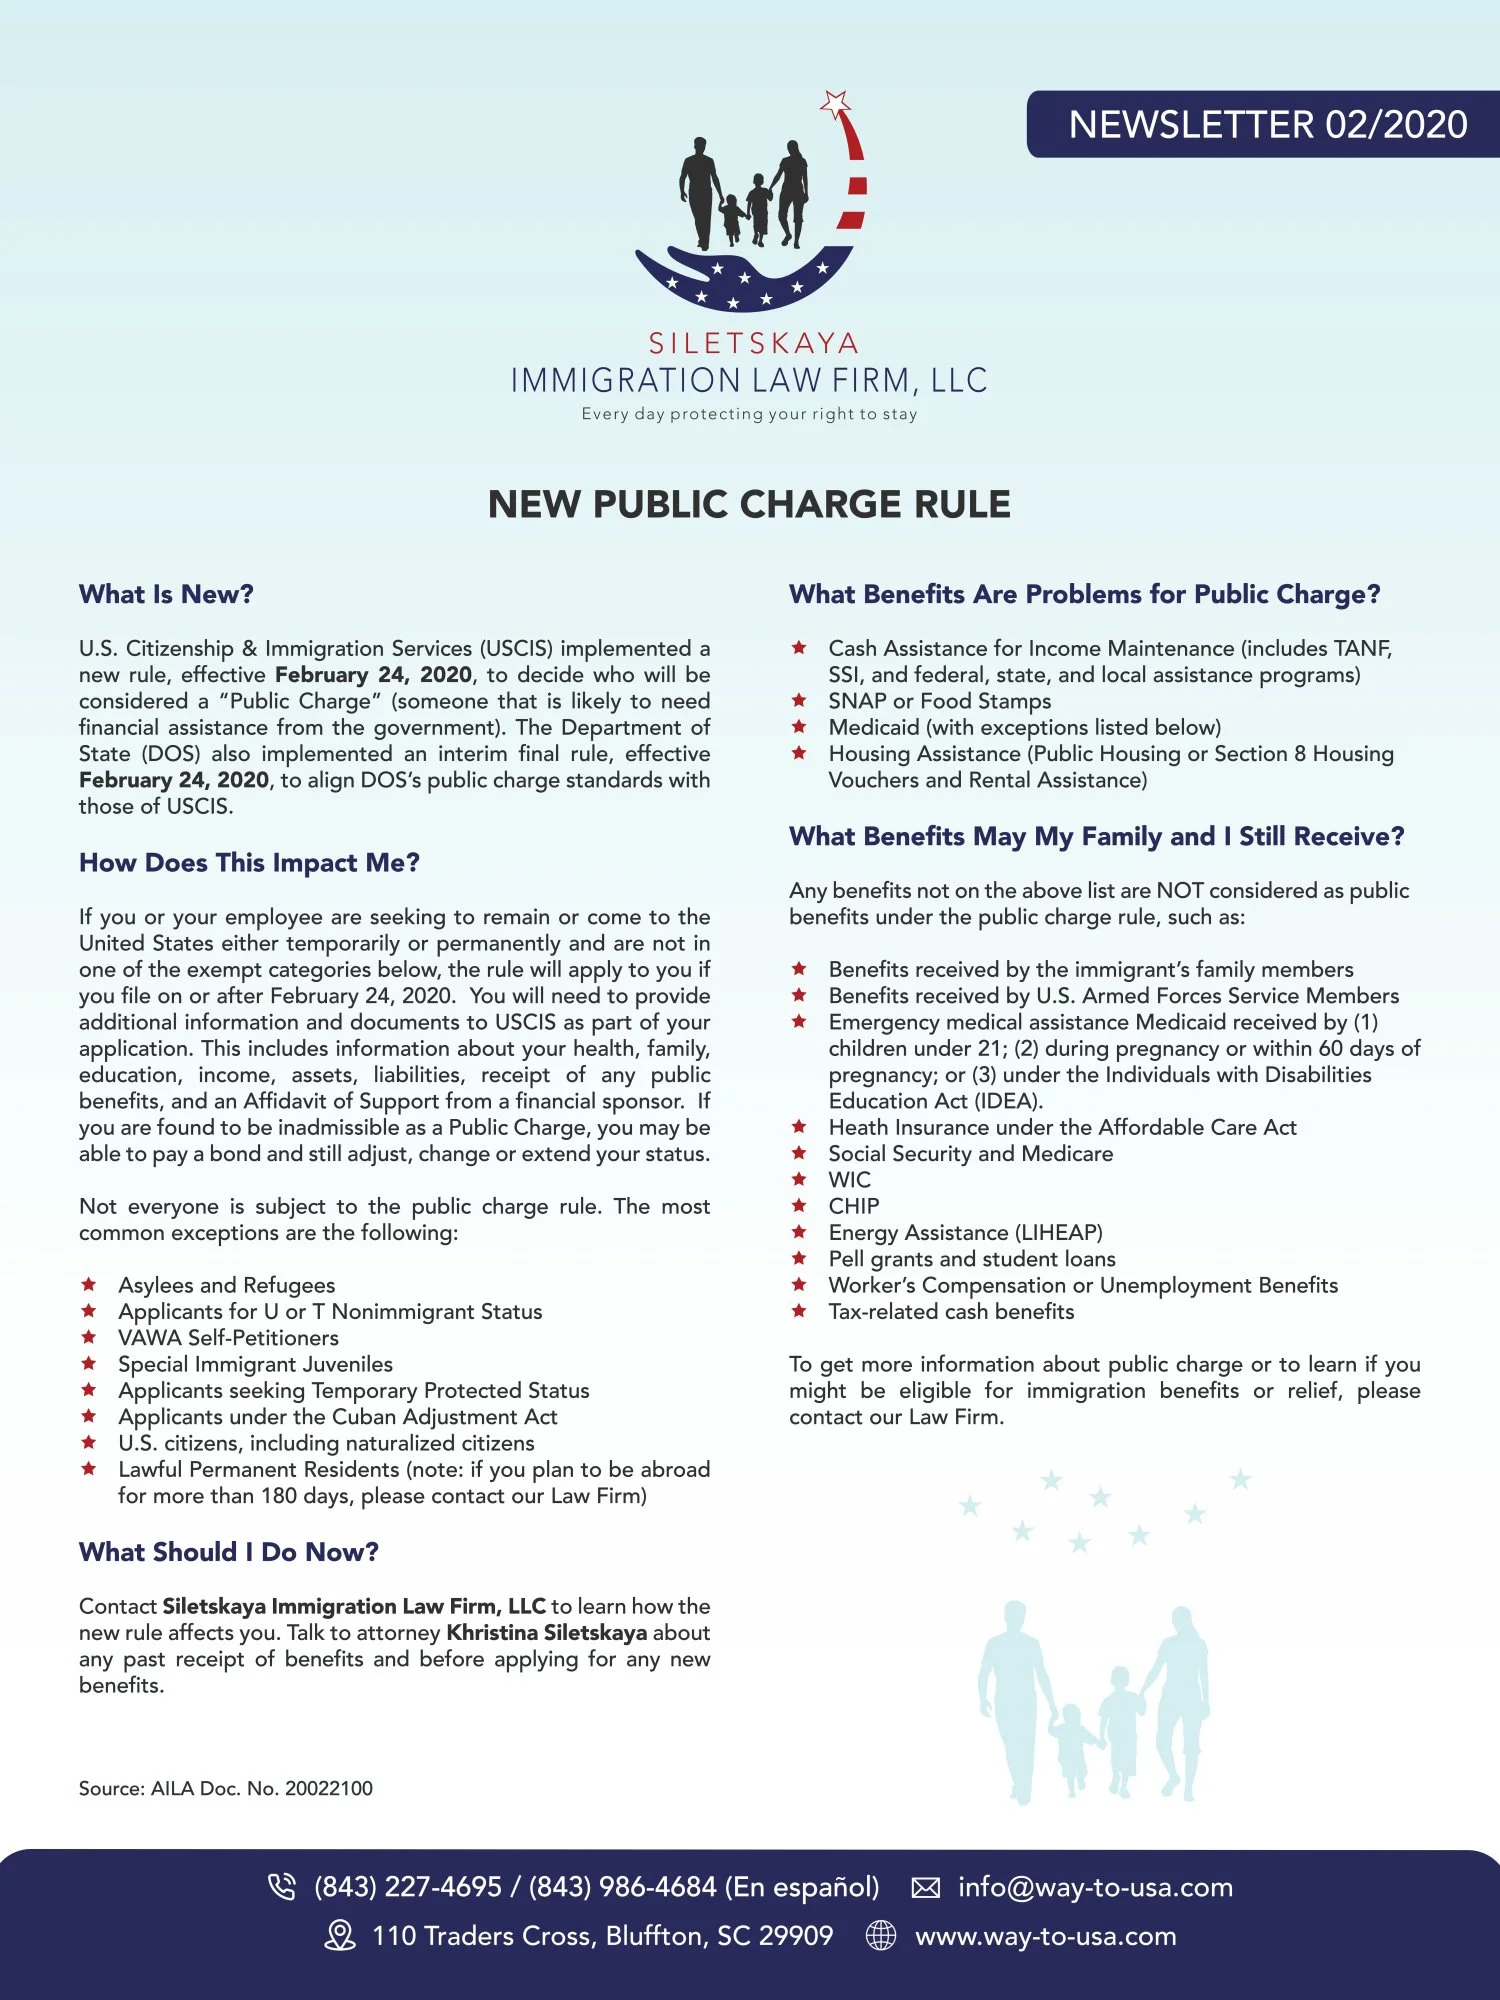 How Does the New Public Charge Rule Affect You?